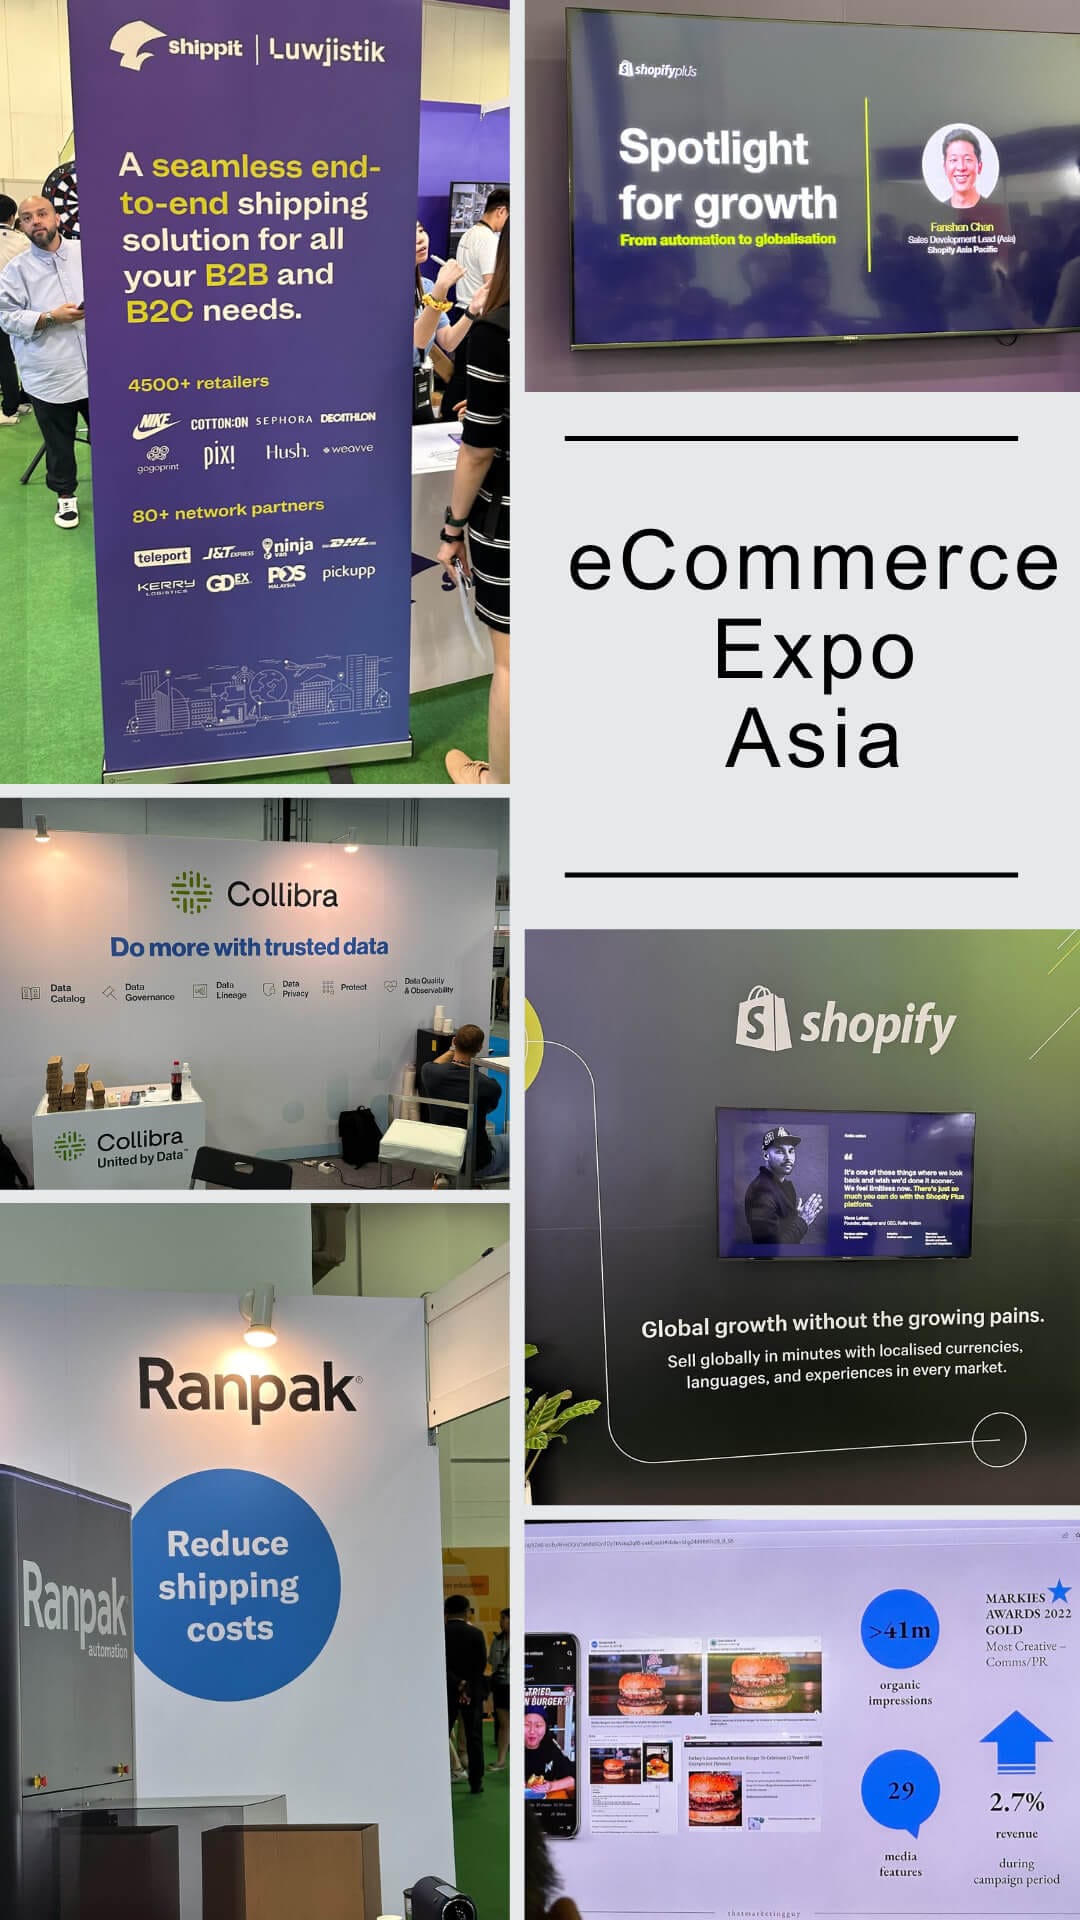 ecommerce expo asia held in singapore